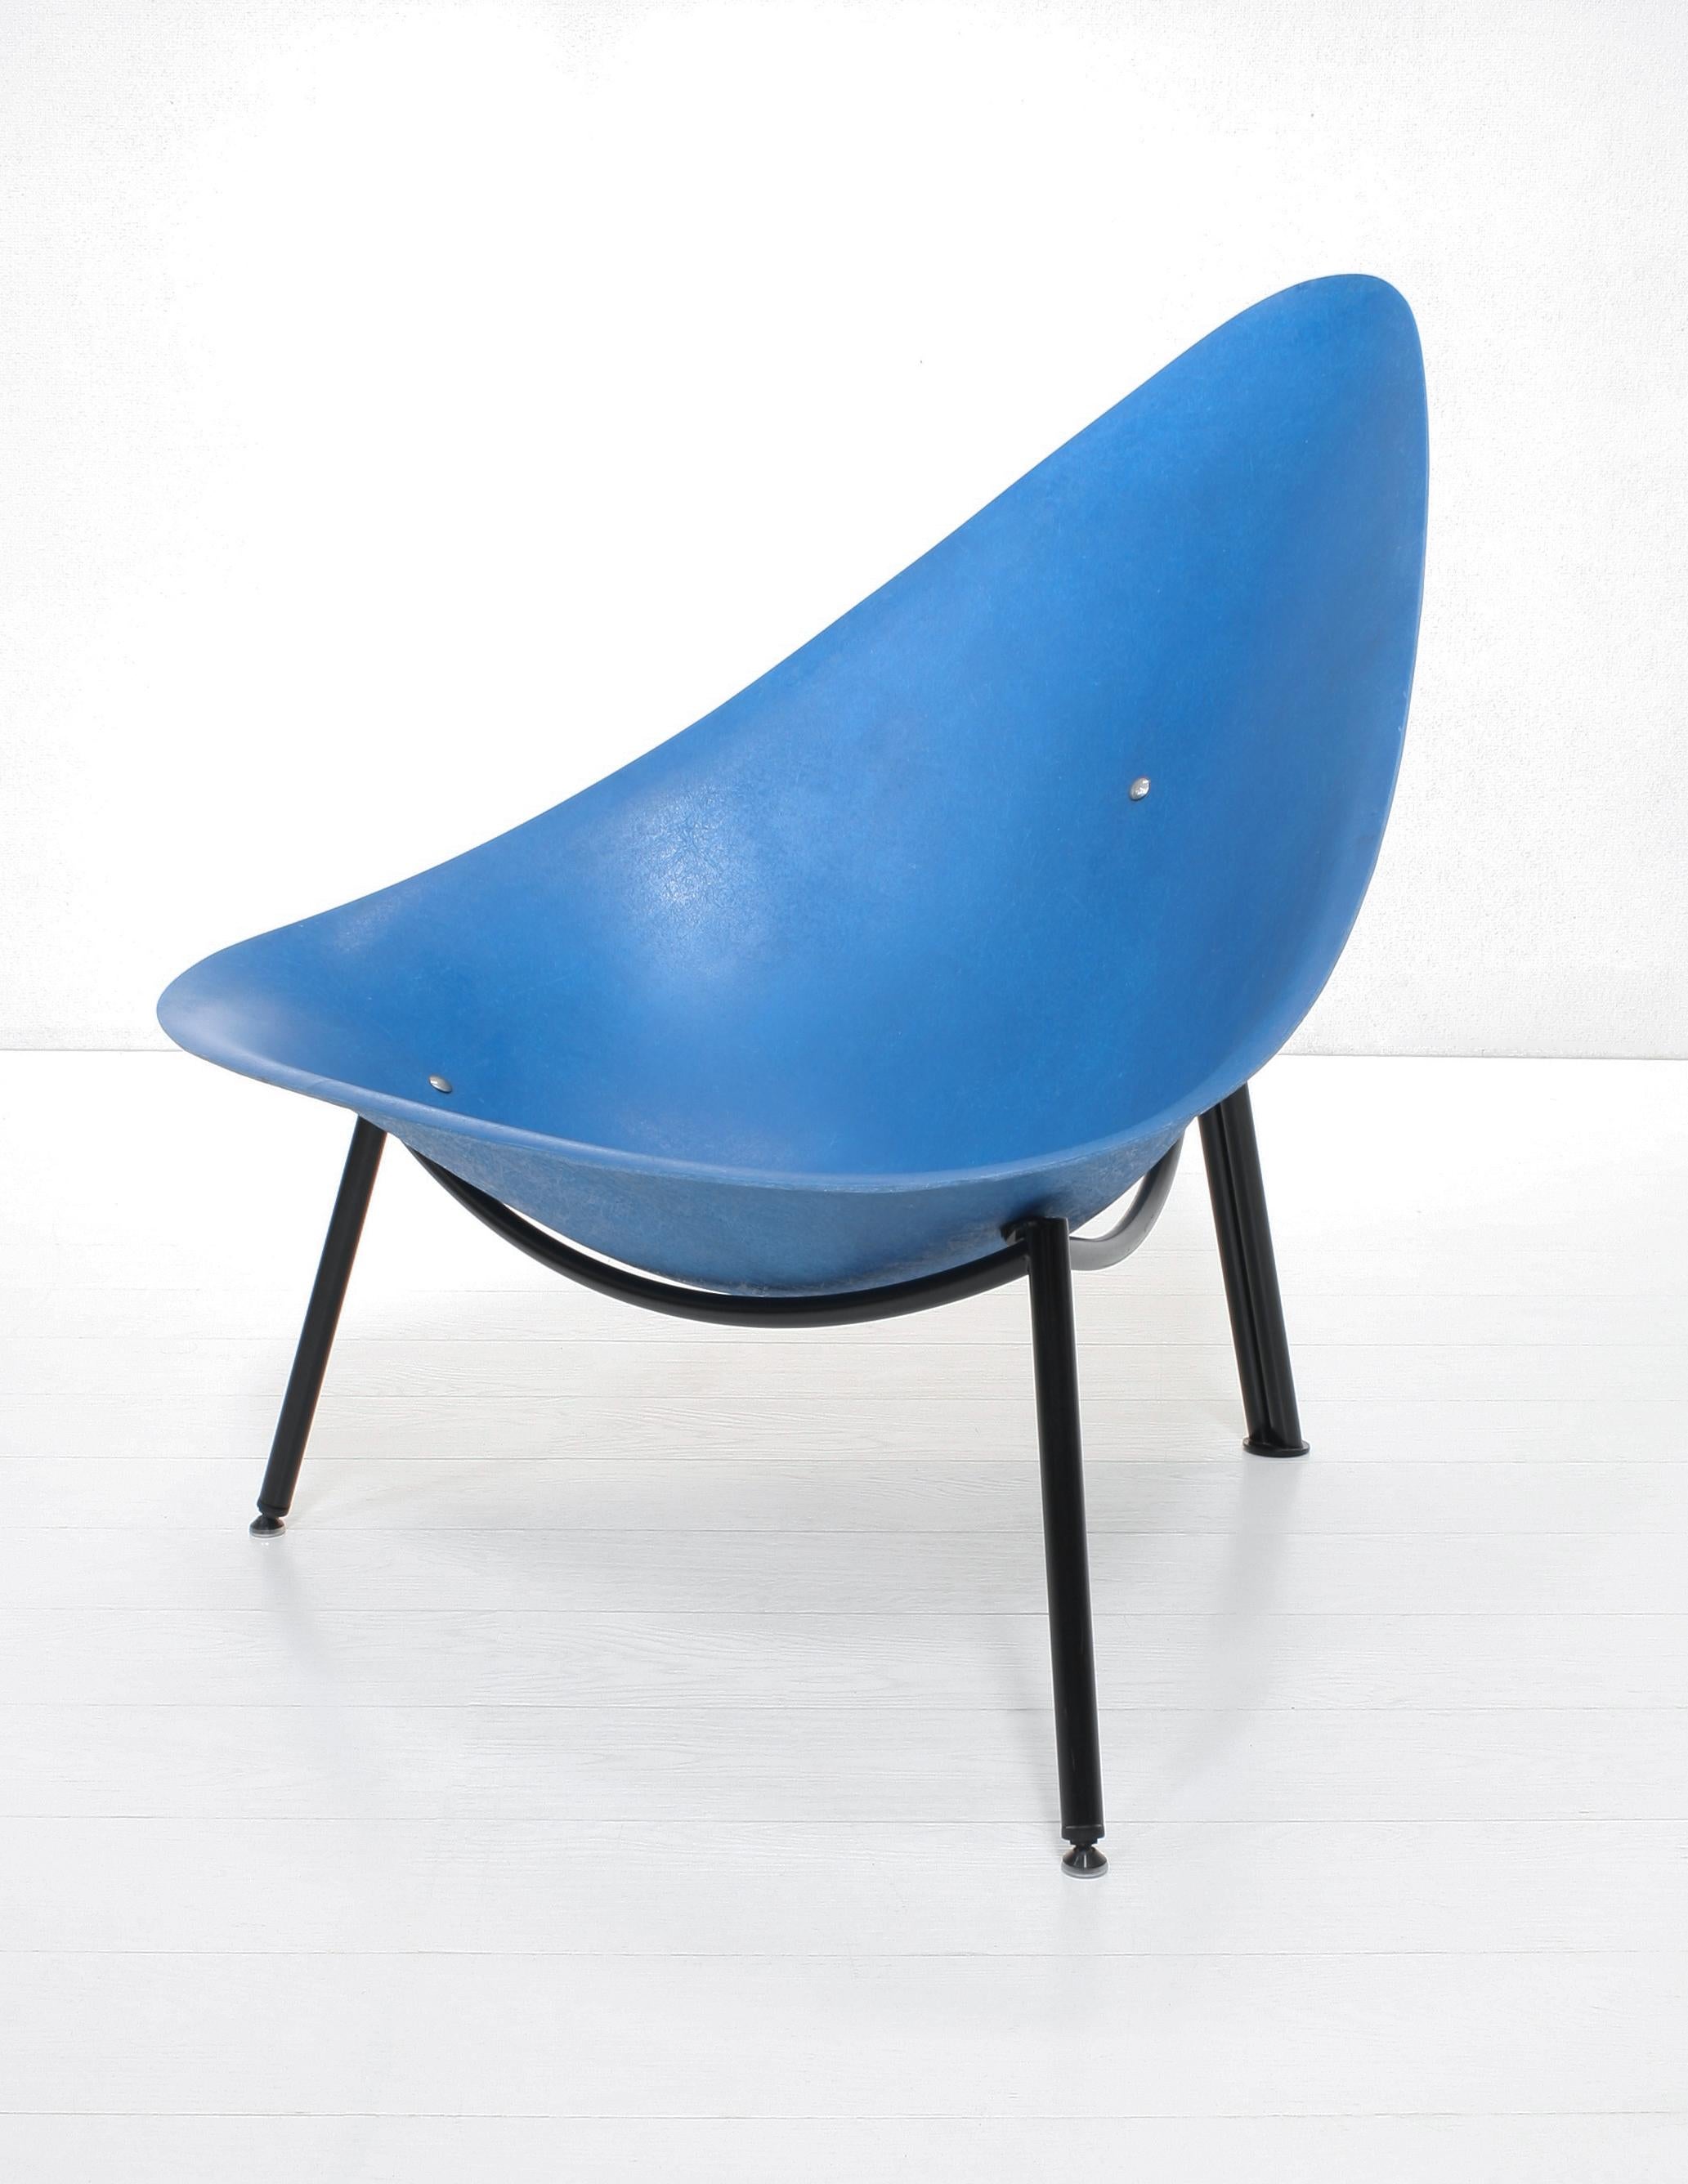 The Mérat fiberglass lounge chair, originally designed in 1956 comes in a blue shell on a black steel tube tripod frame.

This version is more recent but shows a clearly visible strong fibre structure and does have the vintage French mondernist